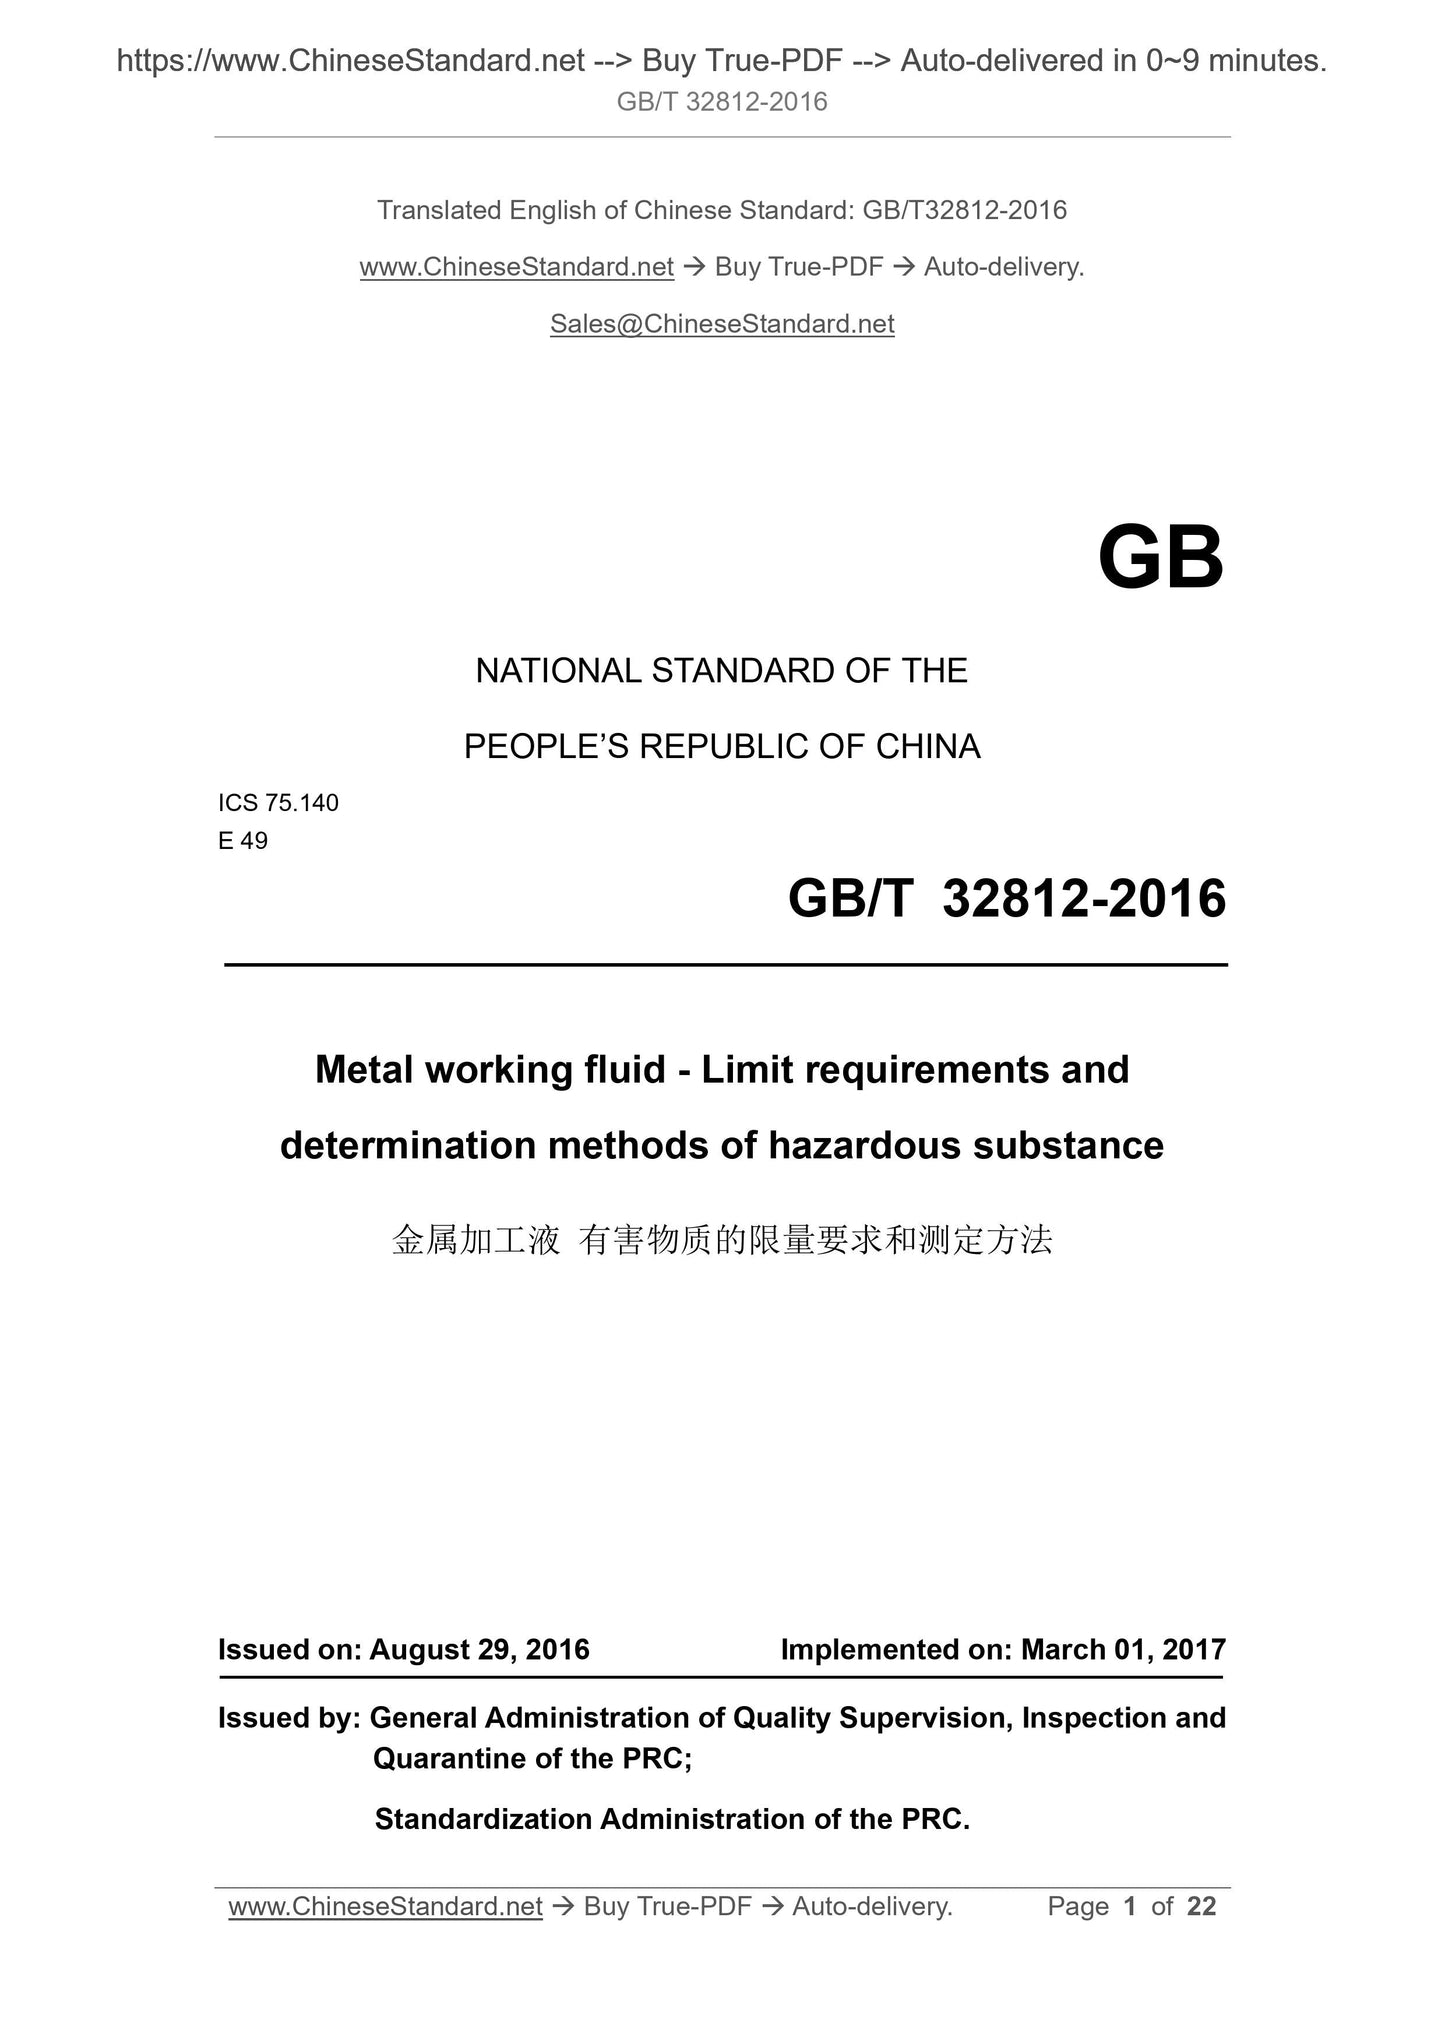 GB/T 32812-2016 Page 1